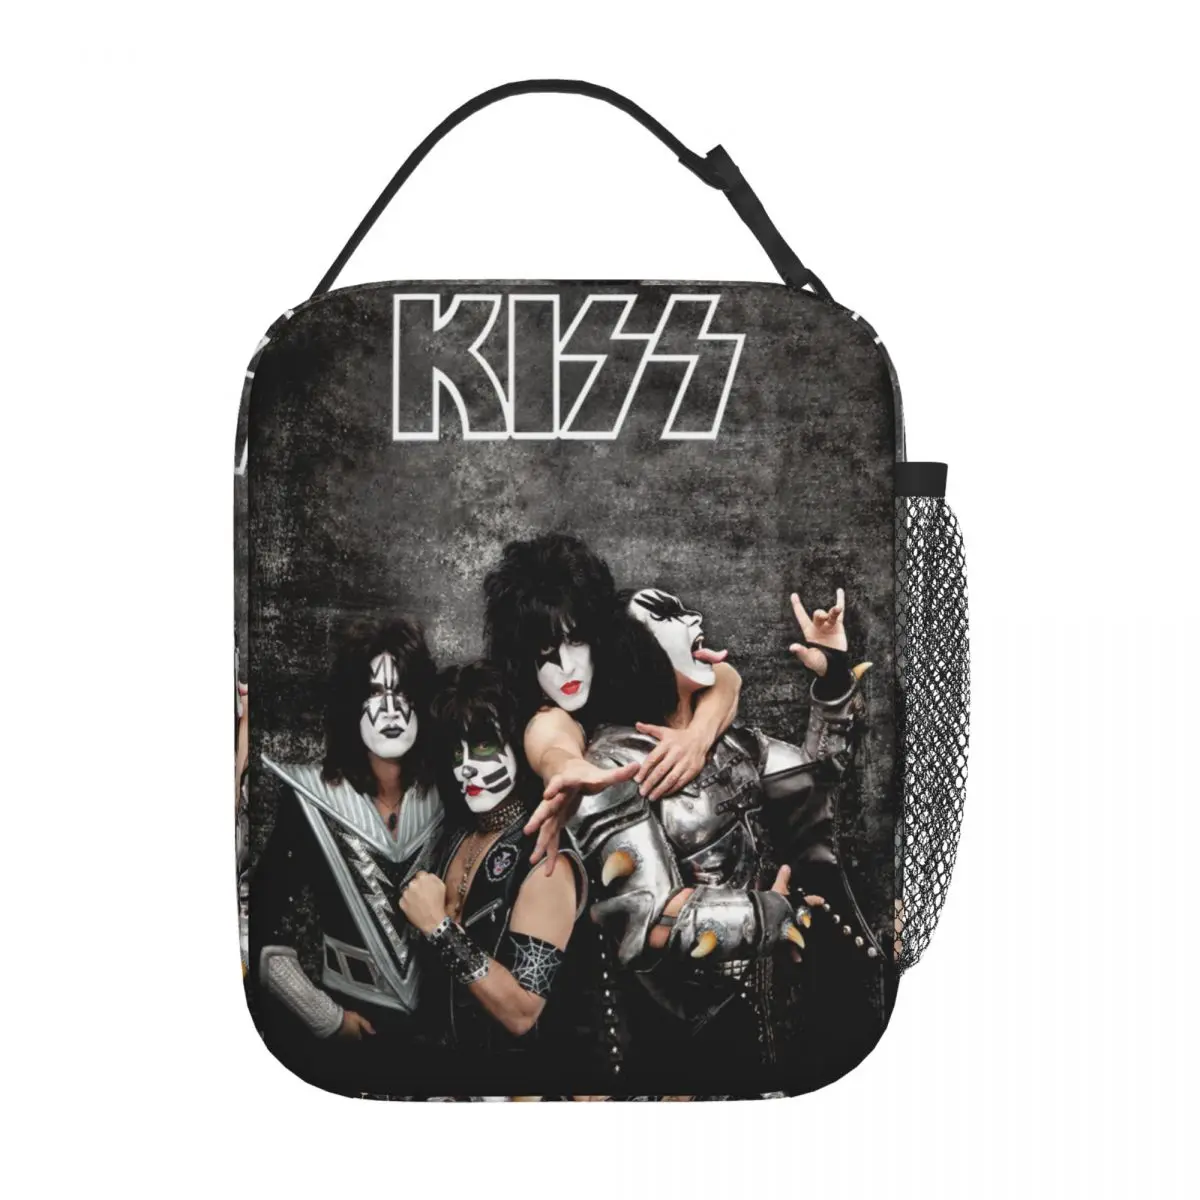 

Crazy Rock Kiss Band Thermal Insulated Lunch Bags School Reusable Lunch Container Cooler Thermal Lunch Box